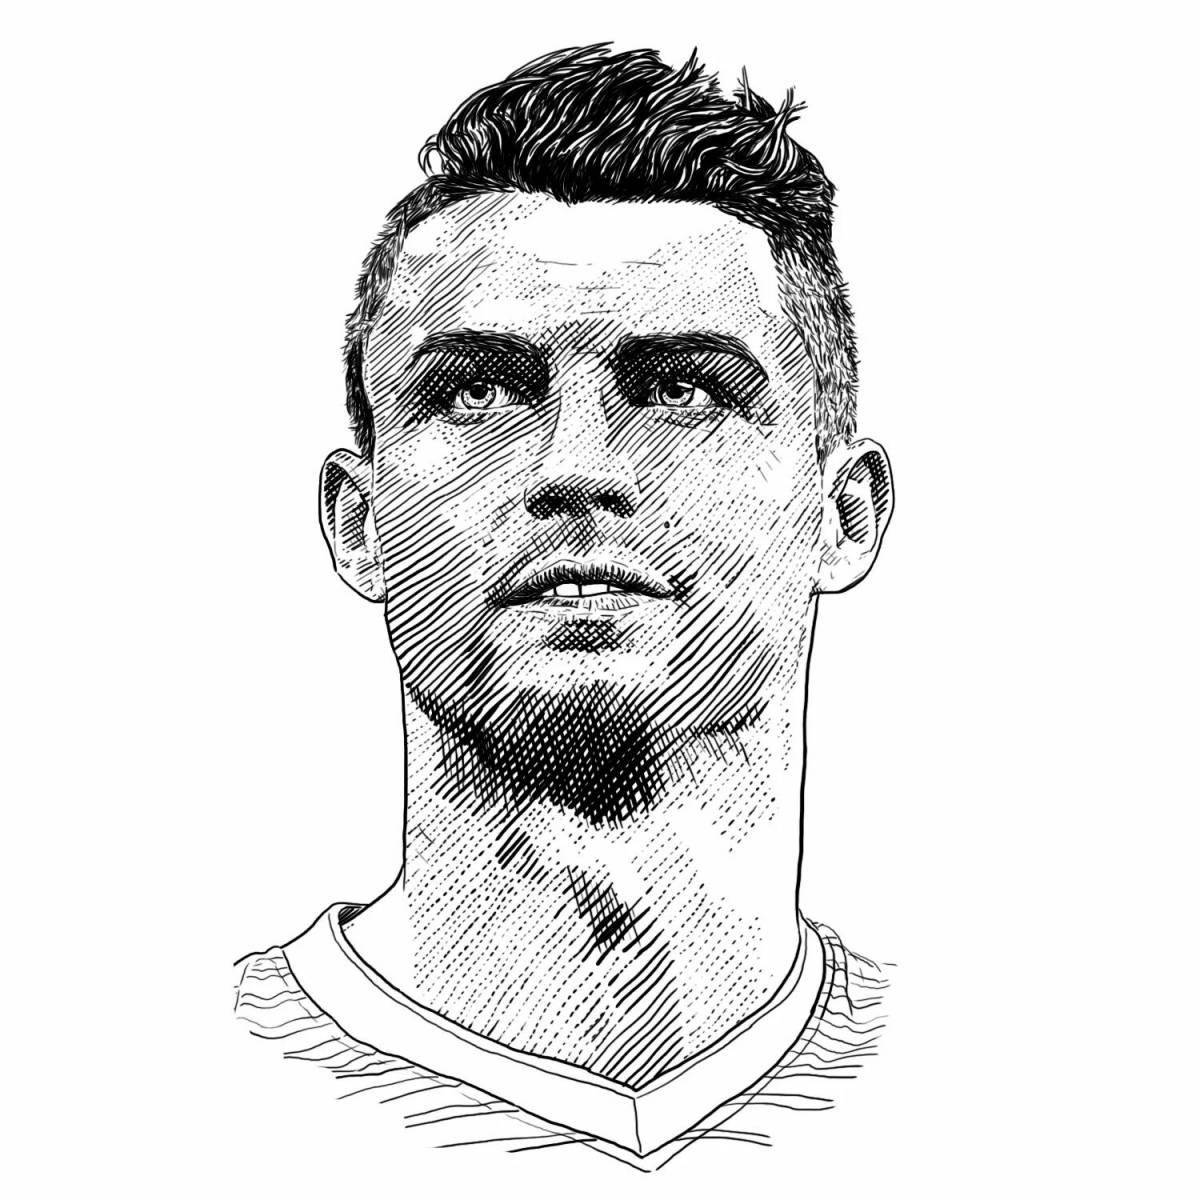 Coloring page of ronaldo pictures